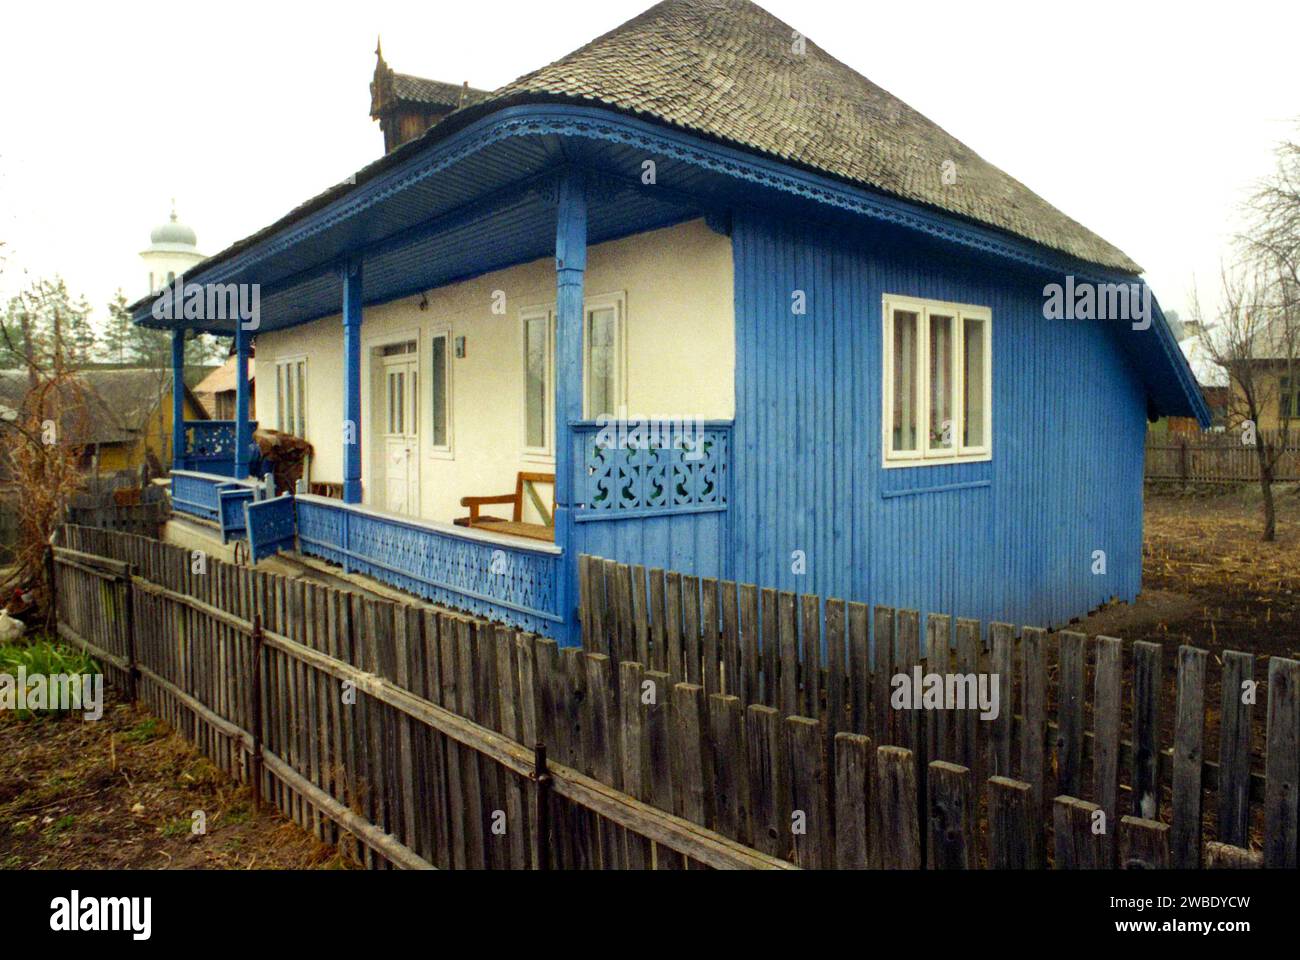 Negrilești, Vrancea County, Romania, approx.. 1998. Exterior of a traditional wooden house with fretwork on the porch and under the roof. Stock Photo